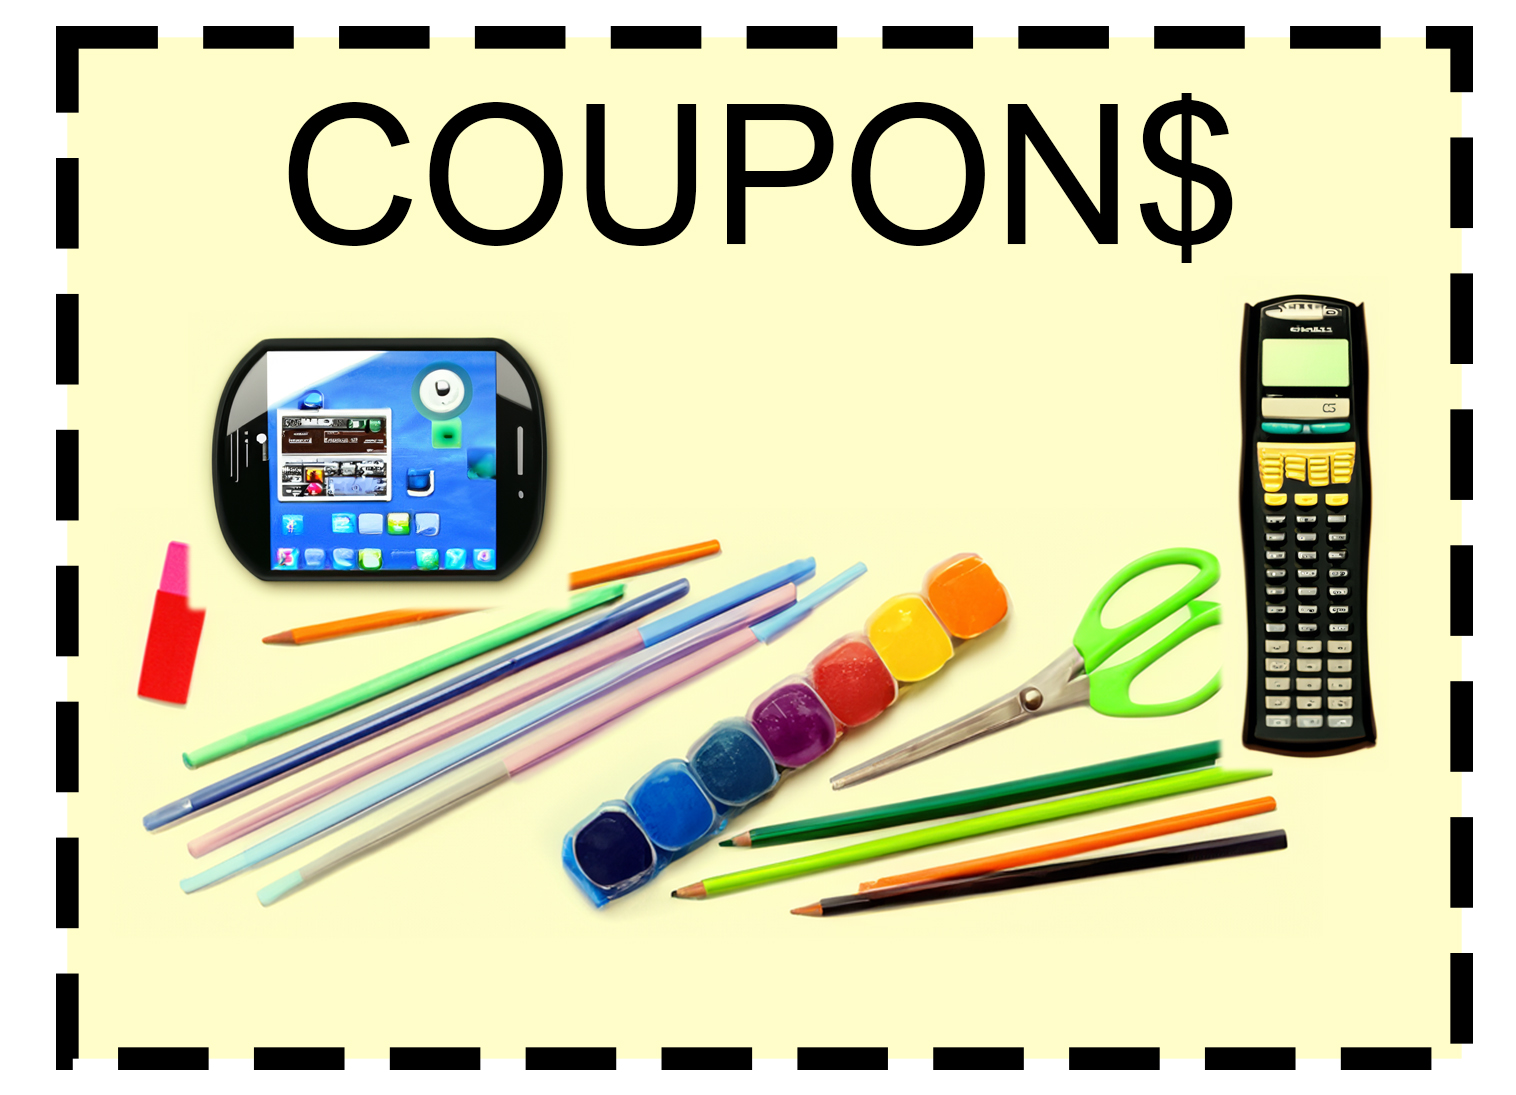 Office and School Coupons (Amazon)